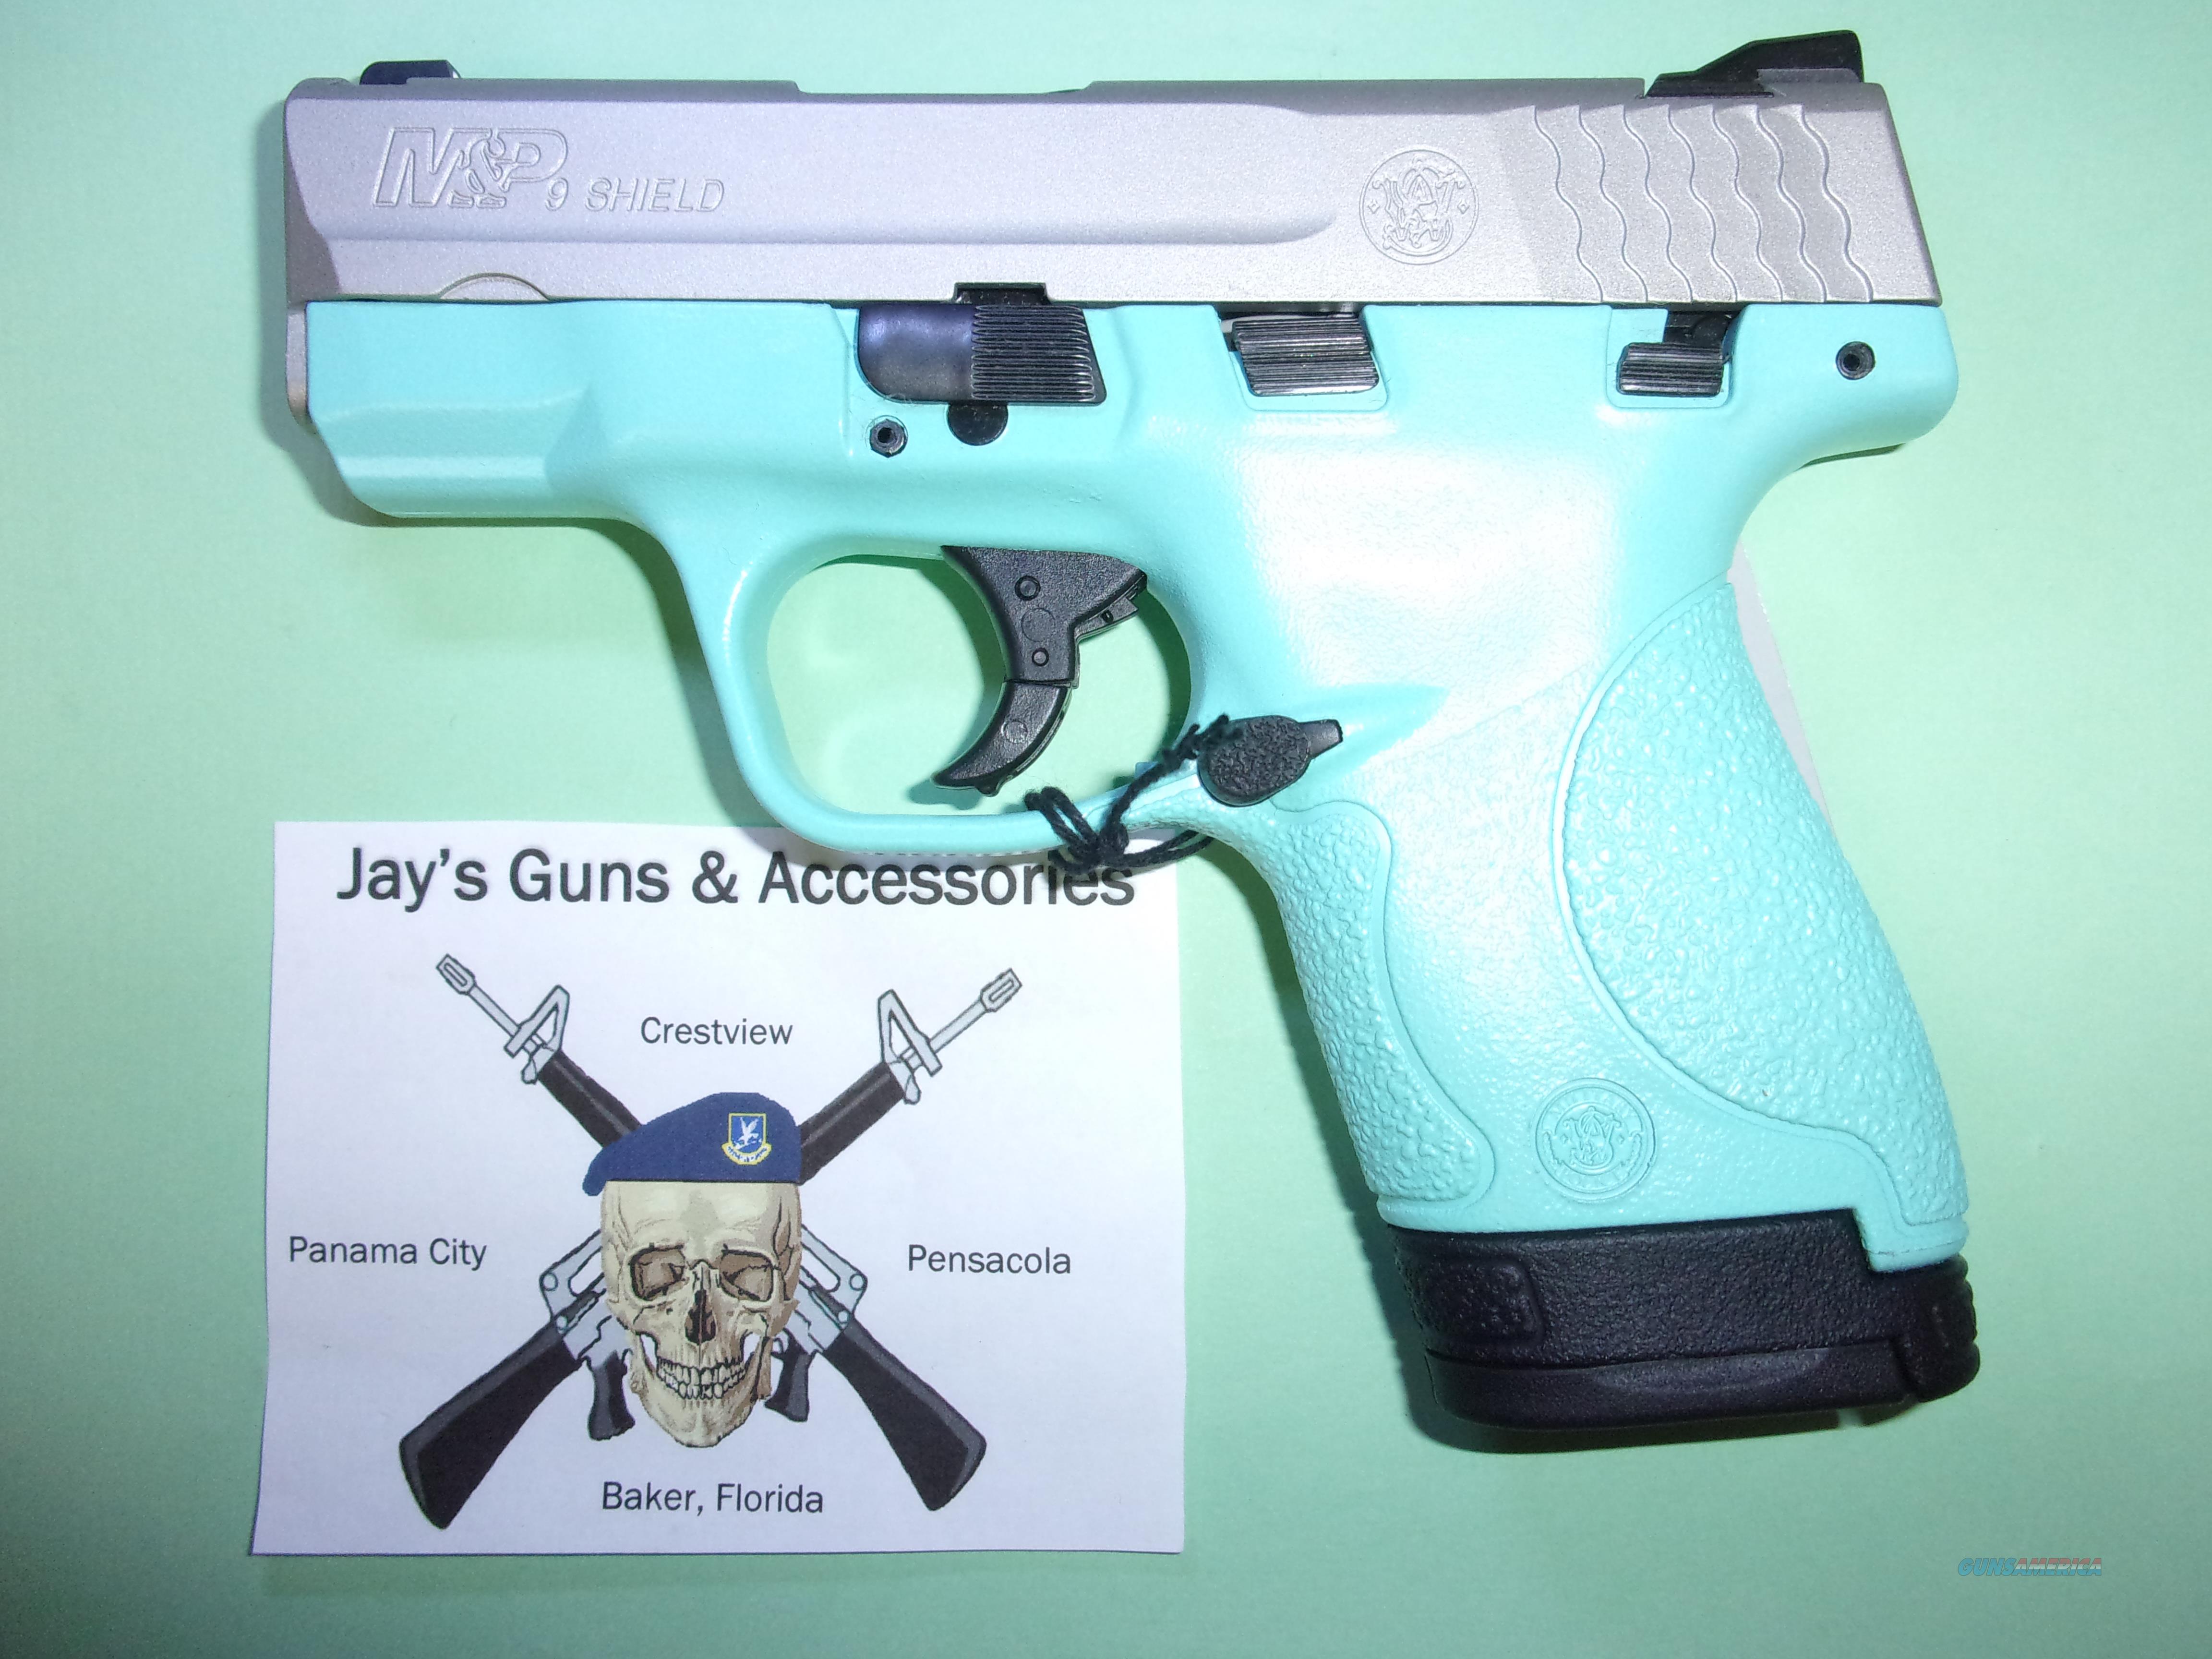 Smith & Wesson M&P 9 Shield w/Teal Frame for sale